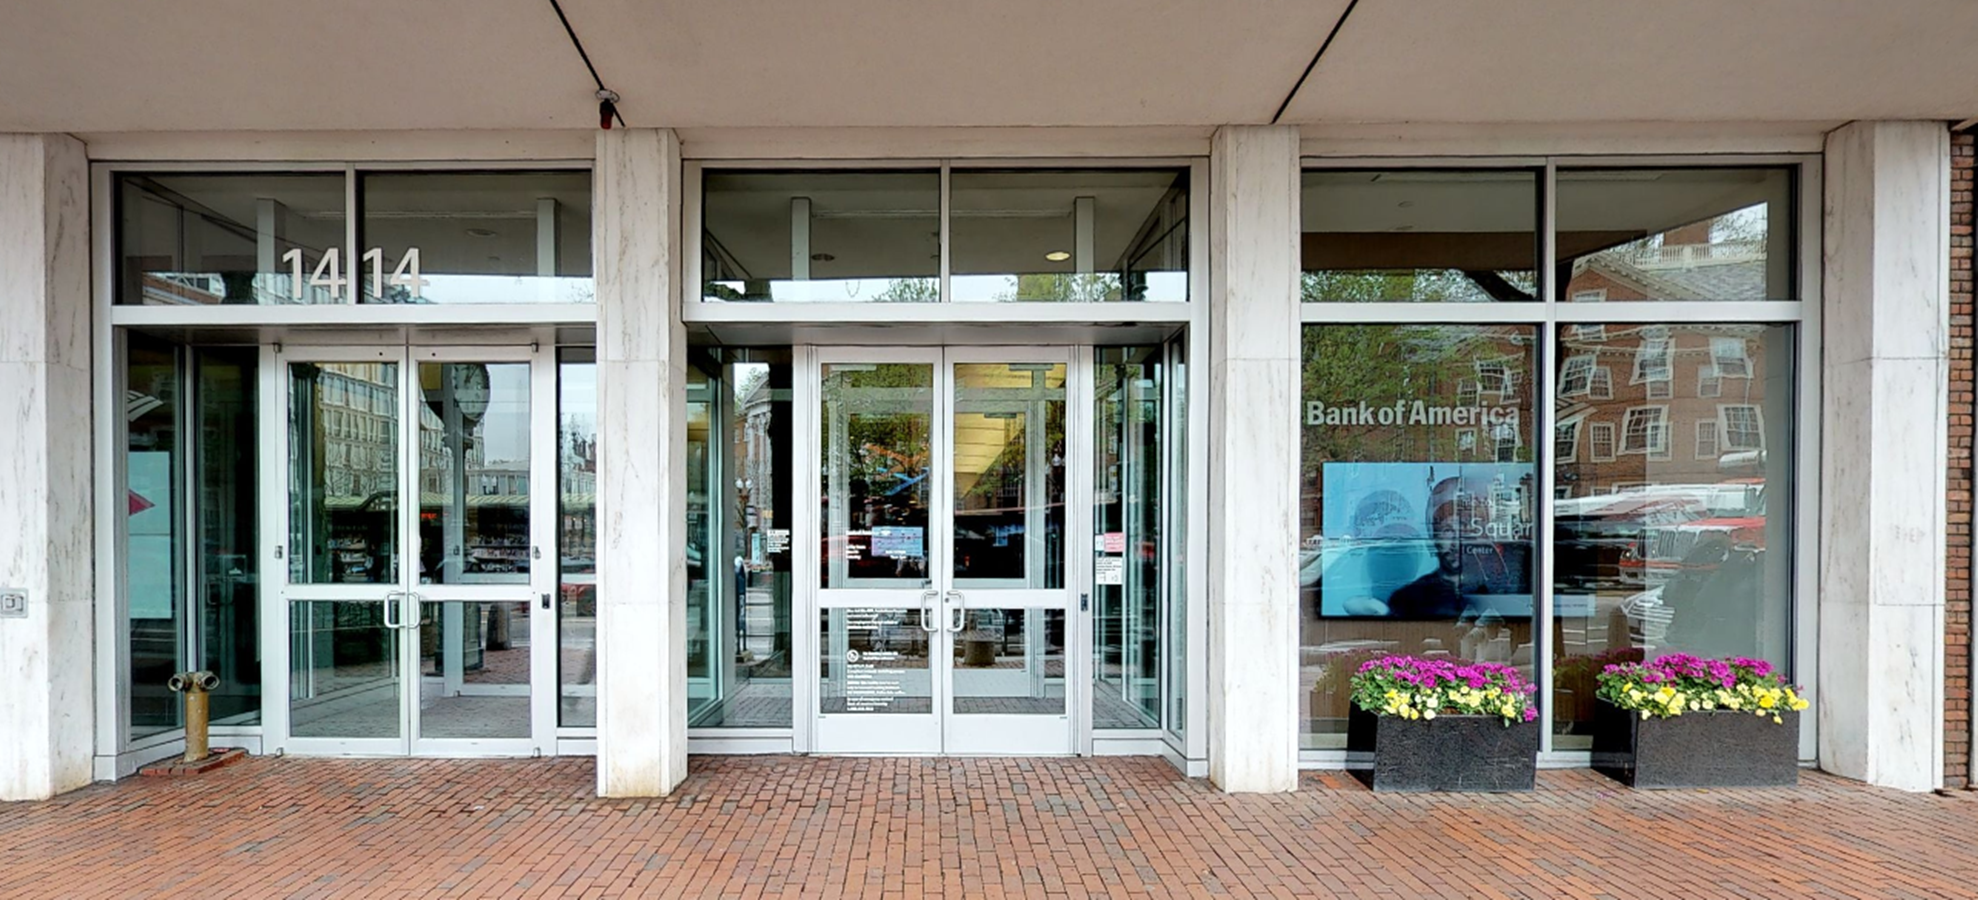 Bank of America financial center with walk-up ATM | 1414 Massachusetts Ave, Cambridge, MA 02138